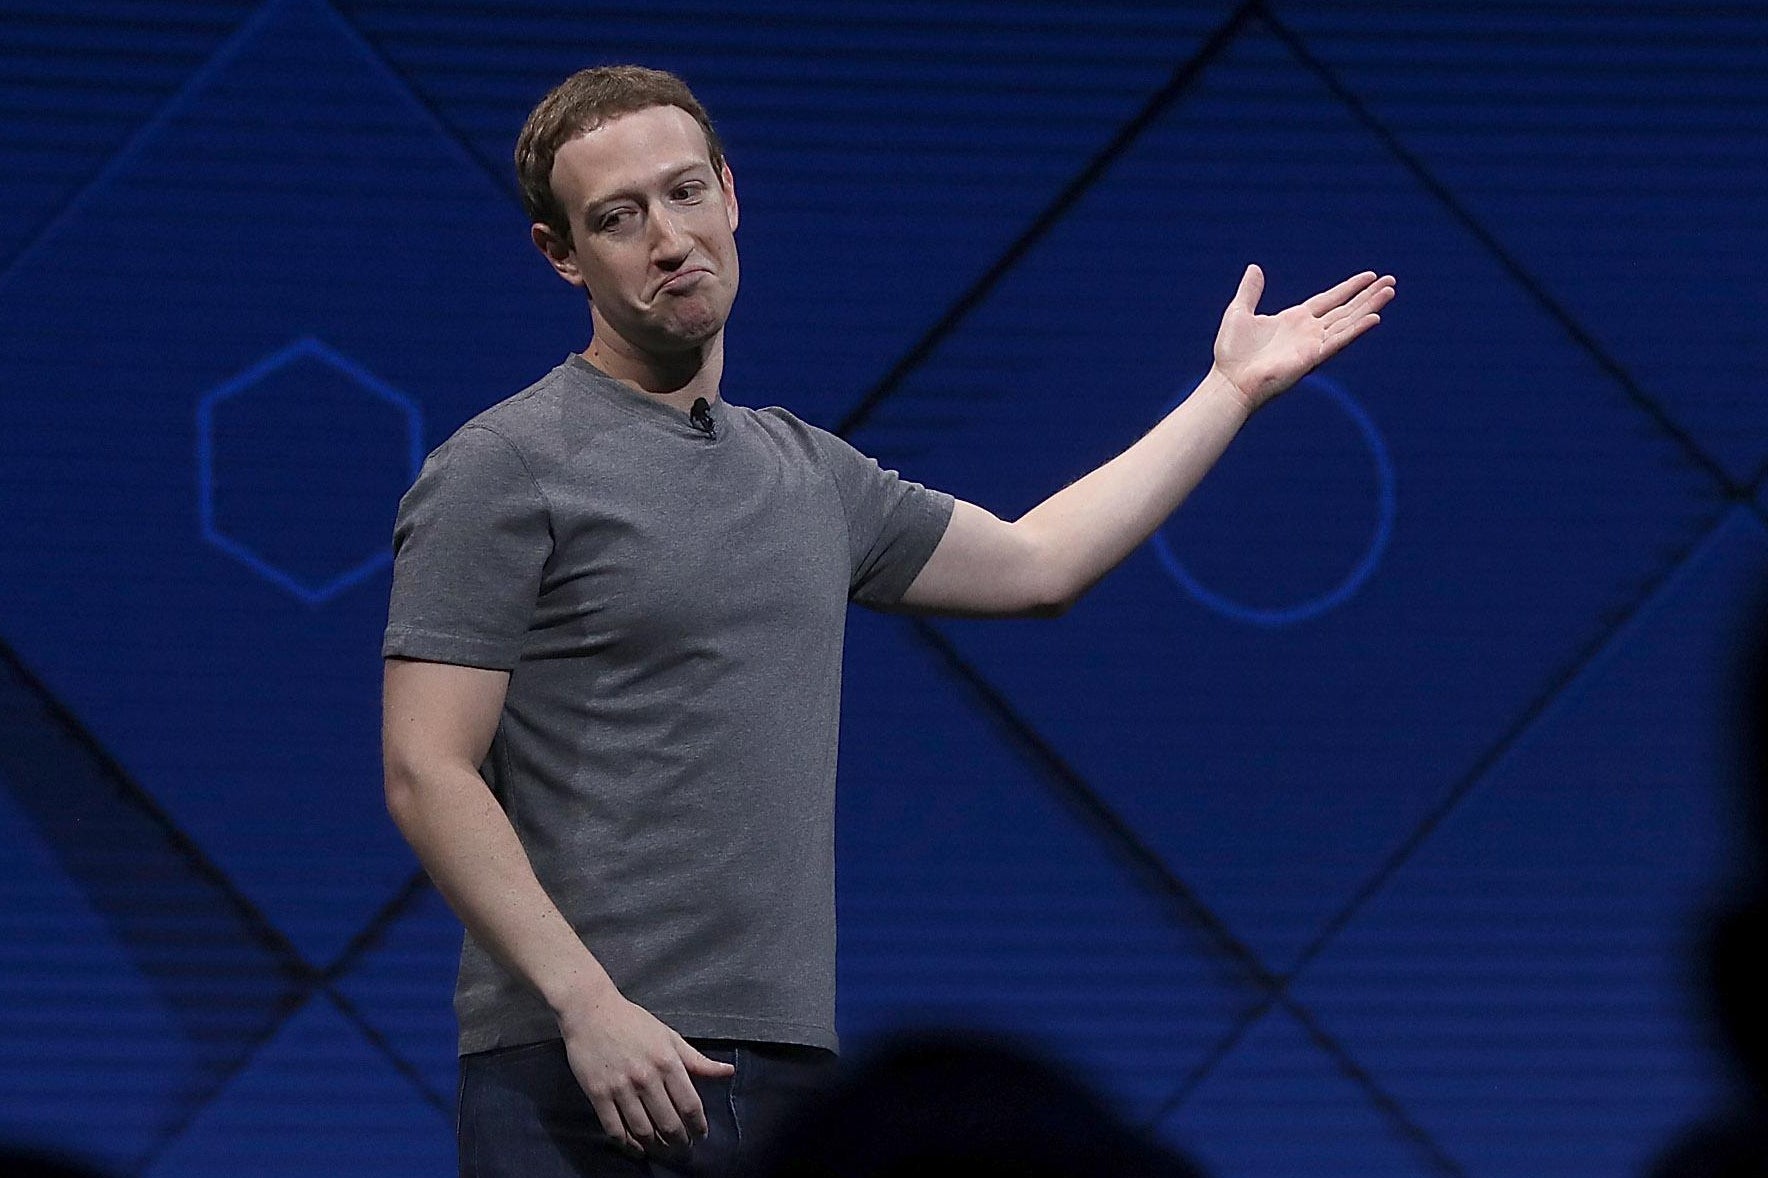 Facebook CEO Mark Zuckerberg has stayed silent on what may be his company's biggest PR crisis yet.